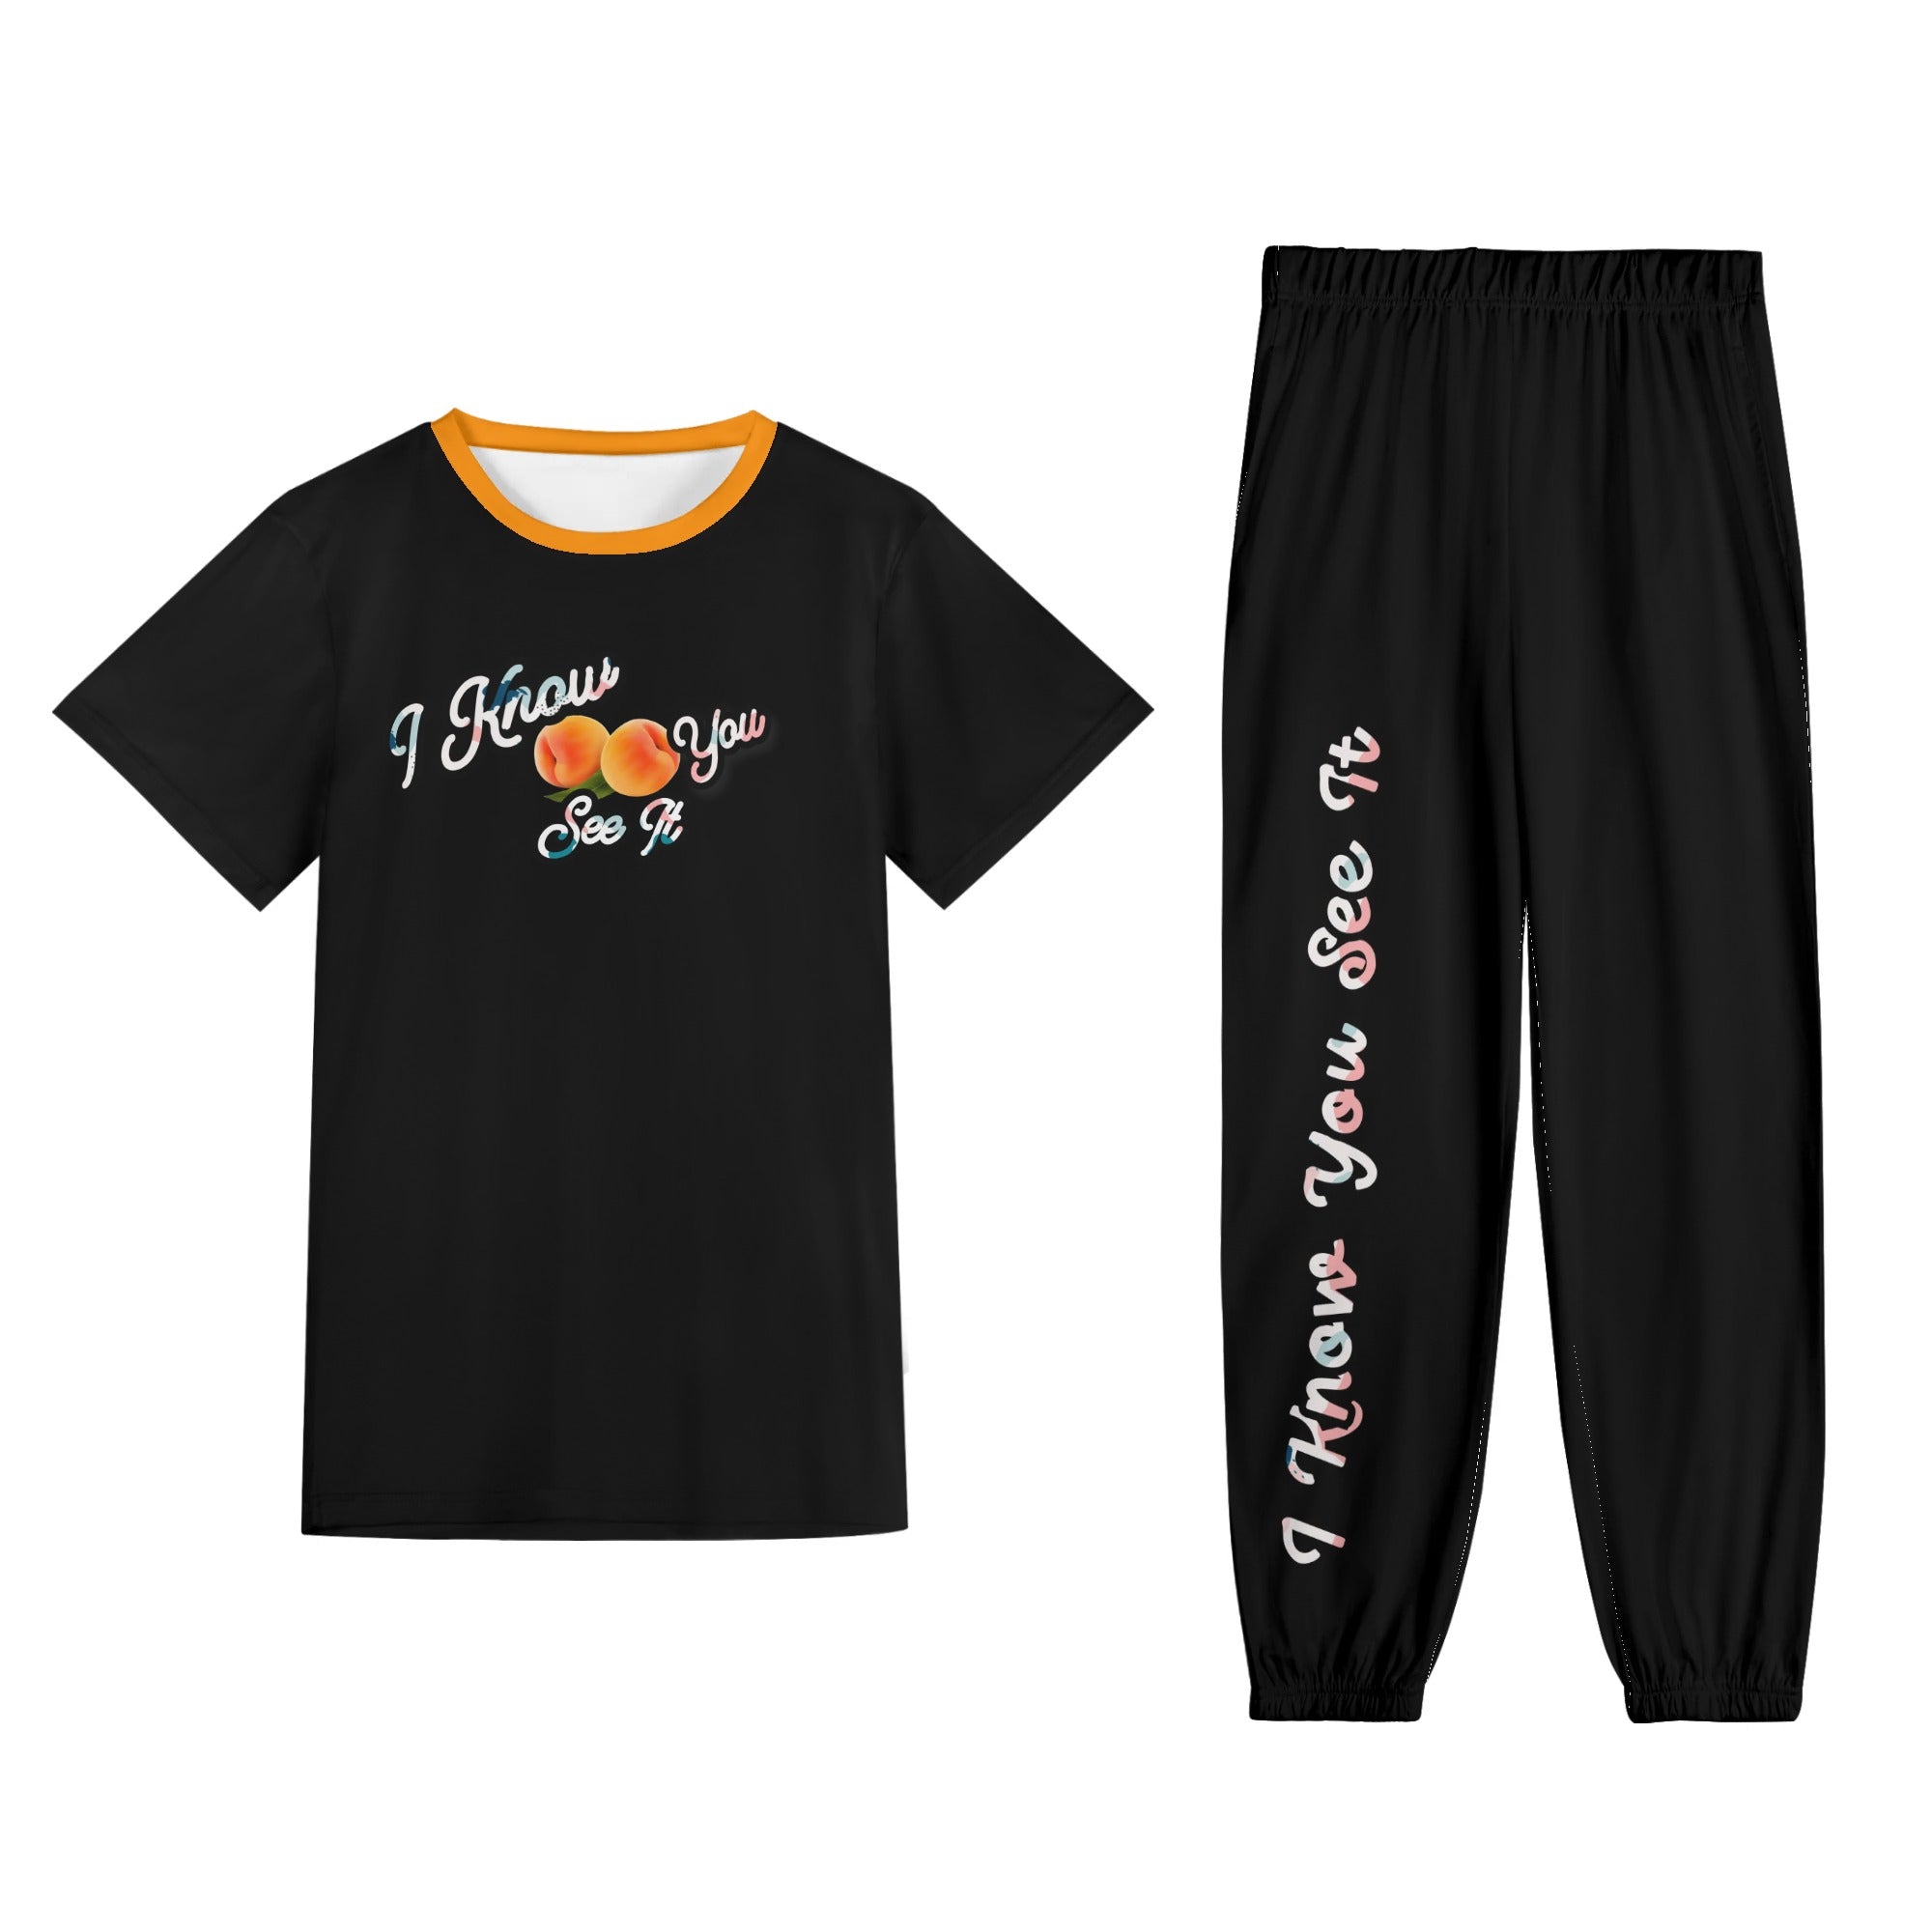 I Know You See It- Womens Short Sleeve Sports Outfit Set 2